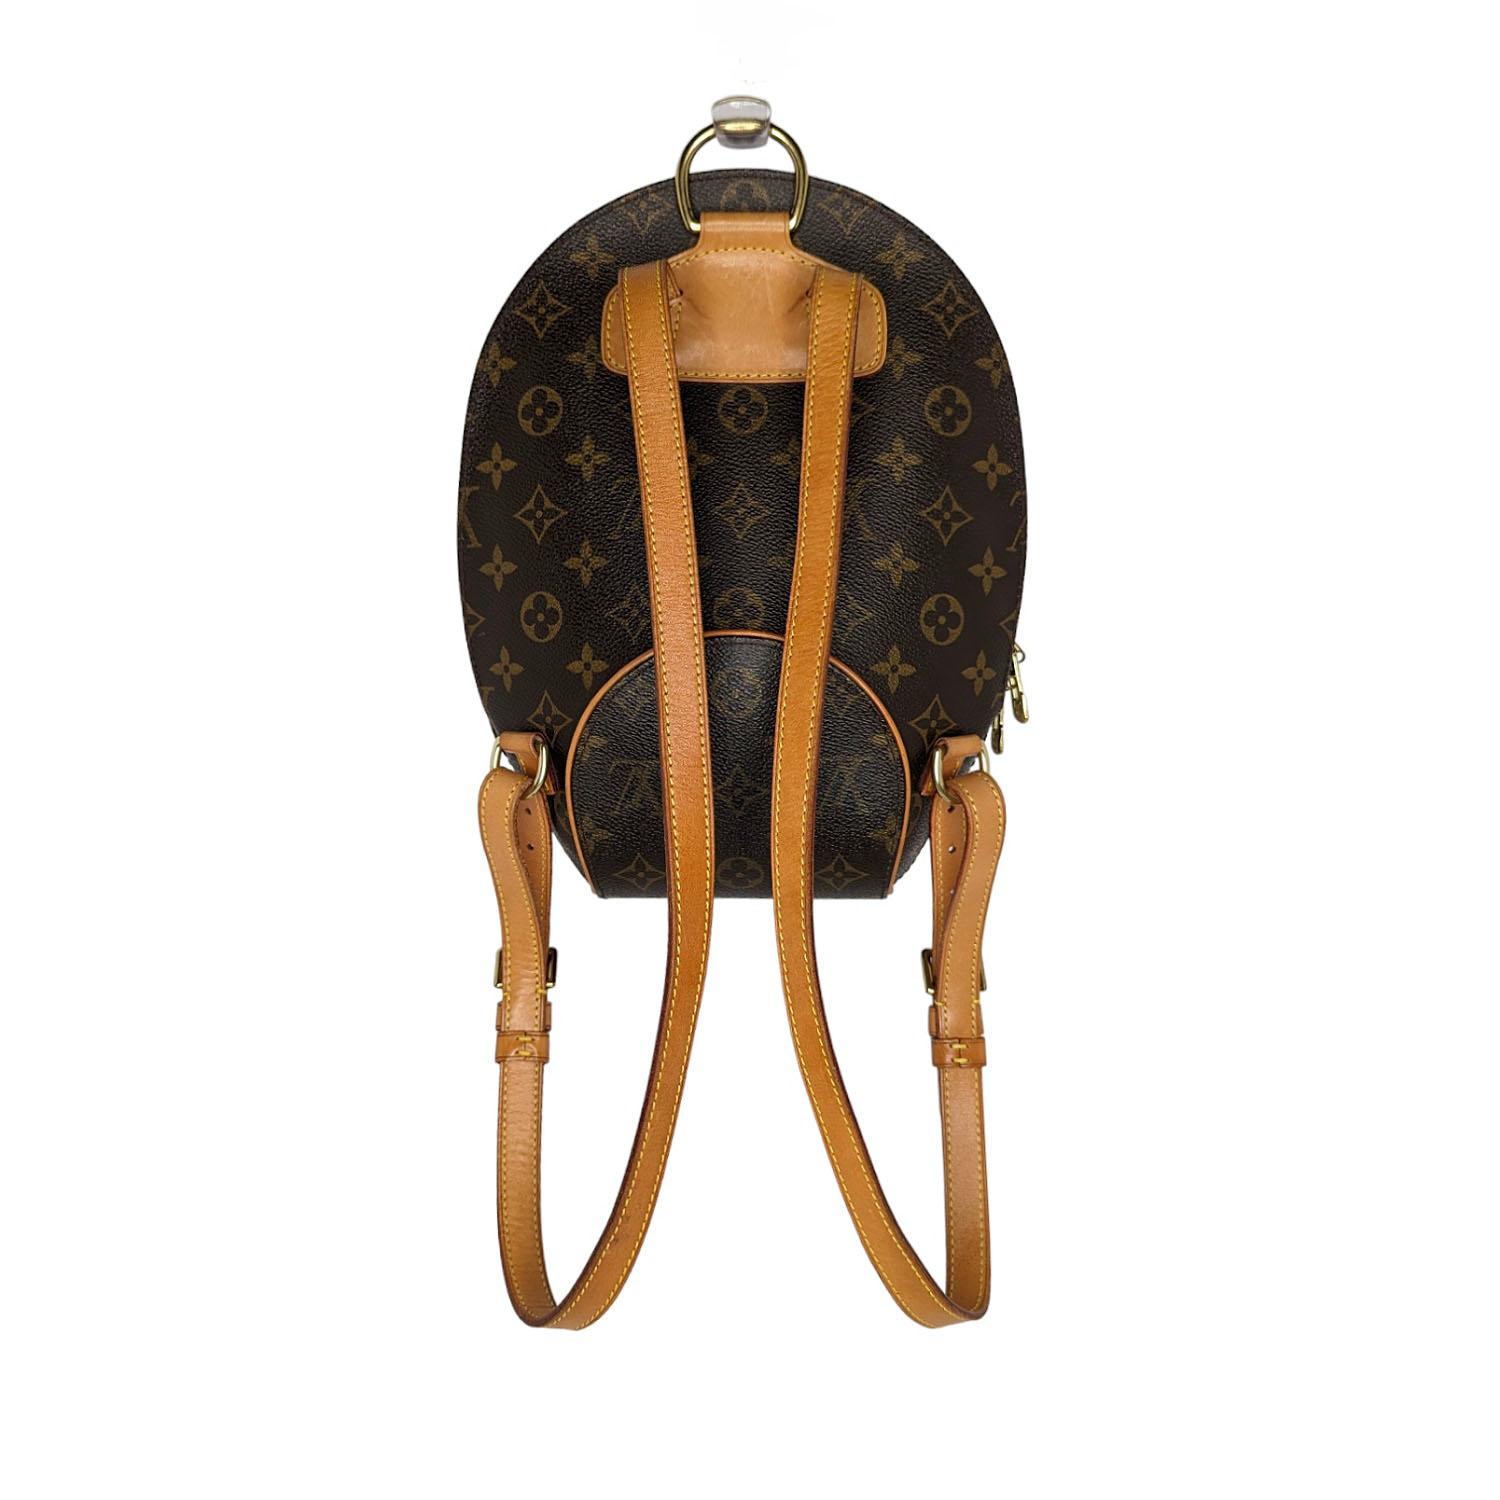 This petite backpack is crafted of classic Louis Vuitton monogram coated canvas with complimentary signature vachetta natural cowhide for structure and style. There is a brass 3/4 wrap-around zipper that opens to an interior of resistant,